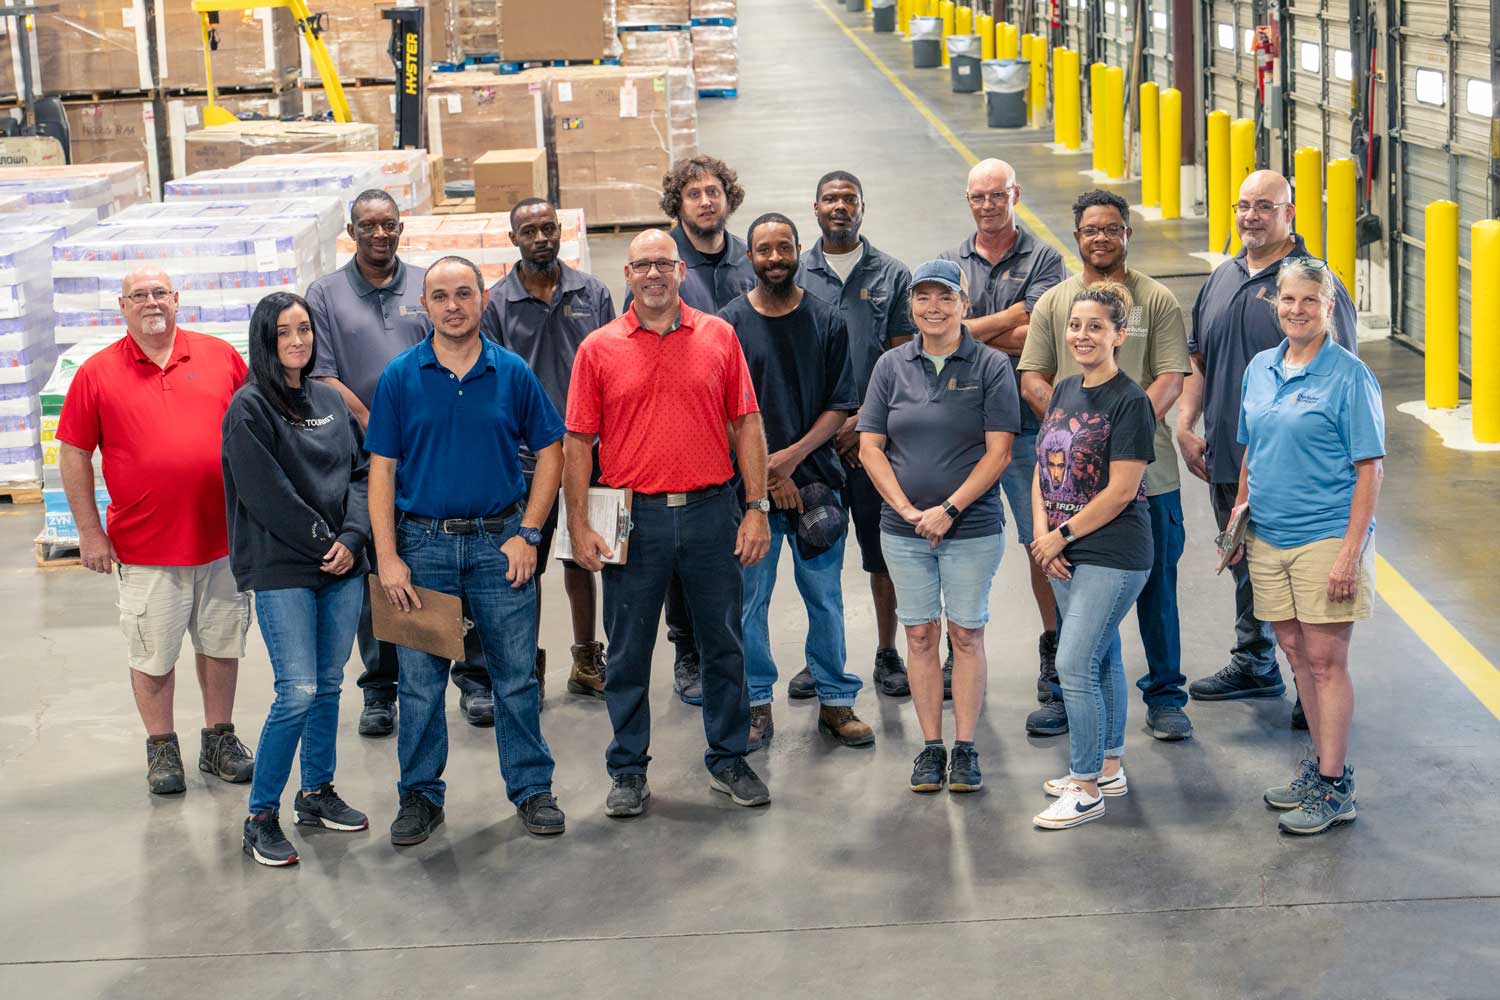 A group of 15 people standing in a warehouse - Contact Distribution Technology